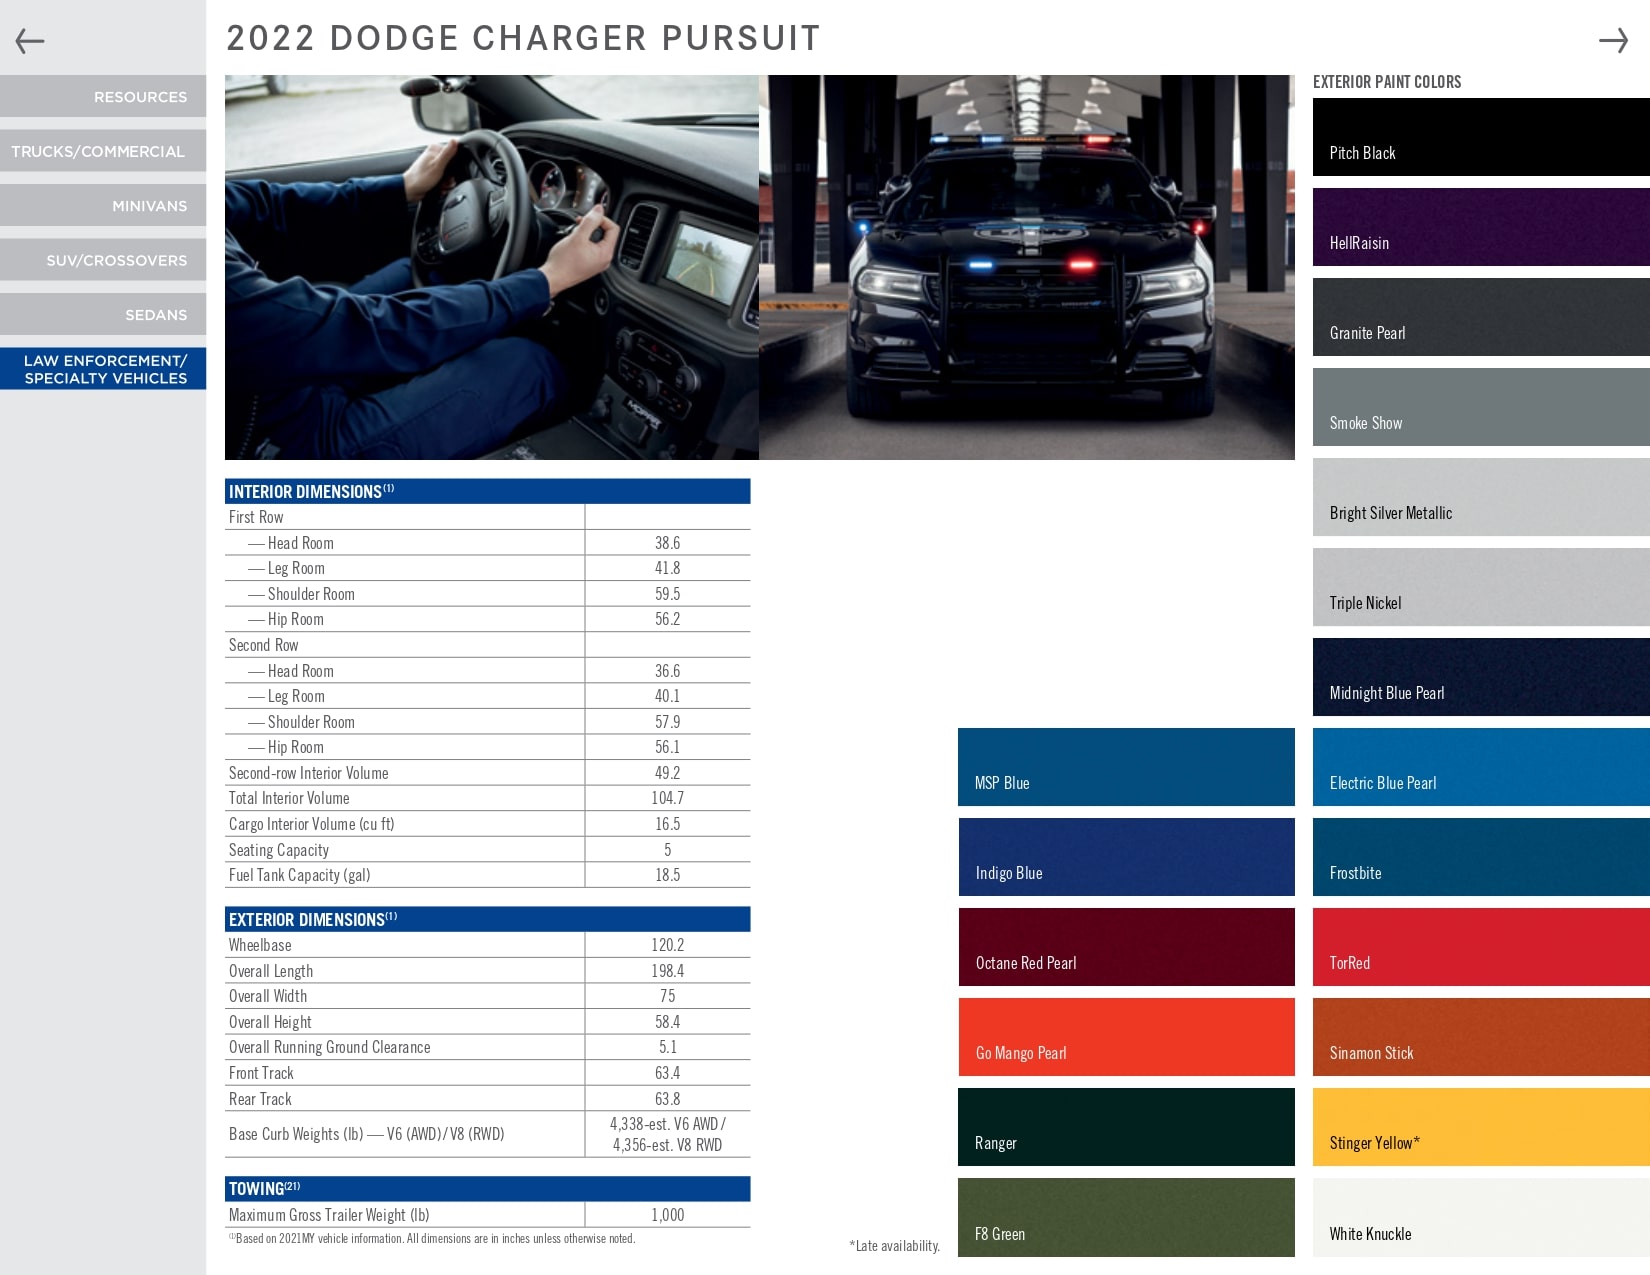 For the 2022 year color shades and examples of the exterior color of the dodge model.